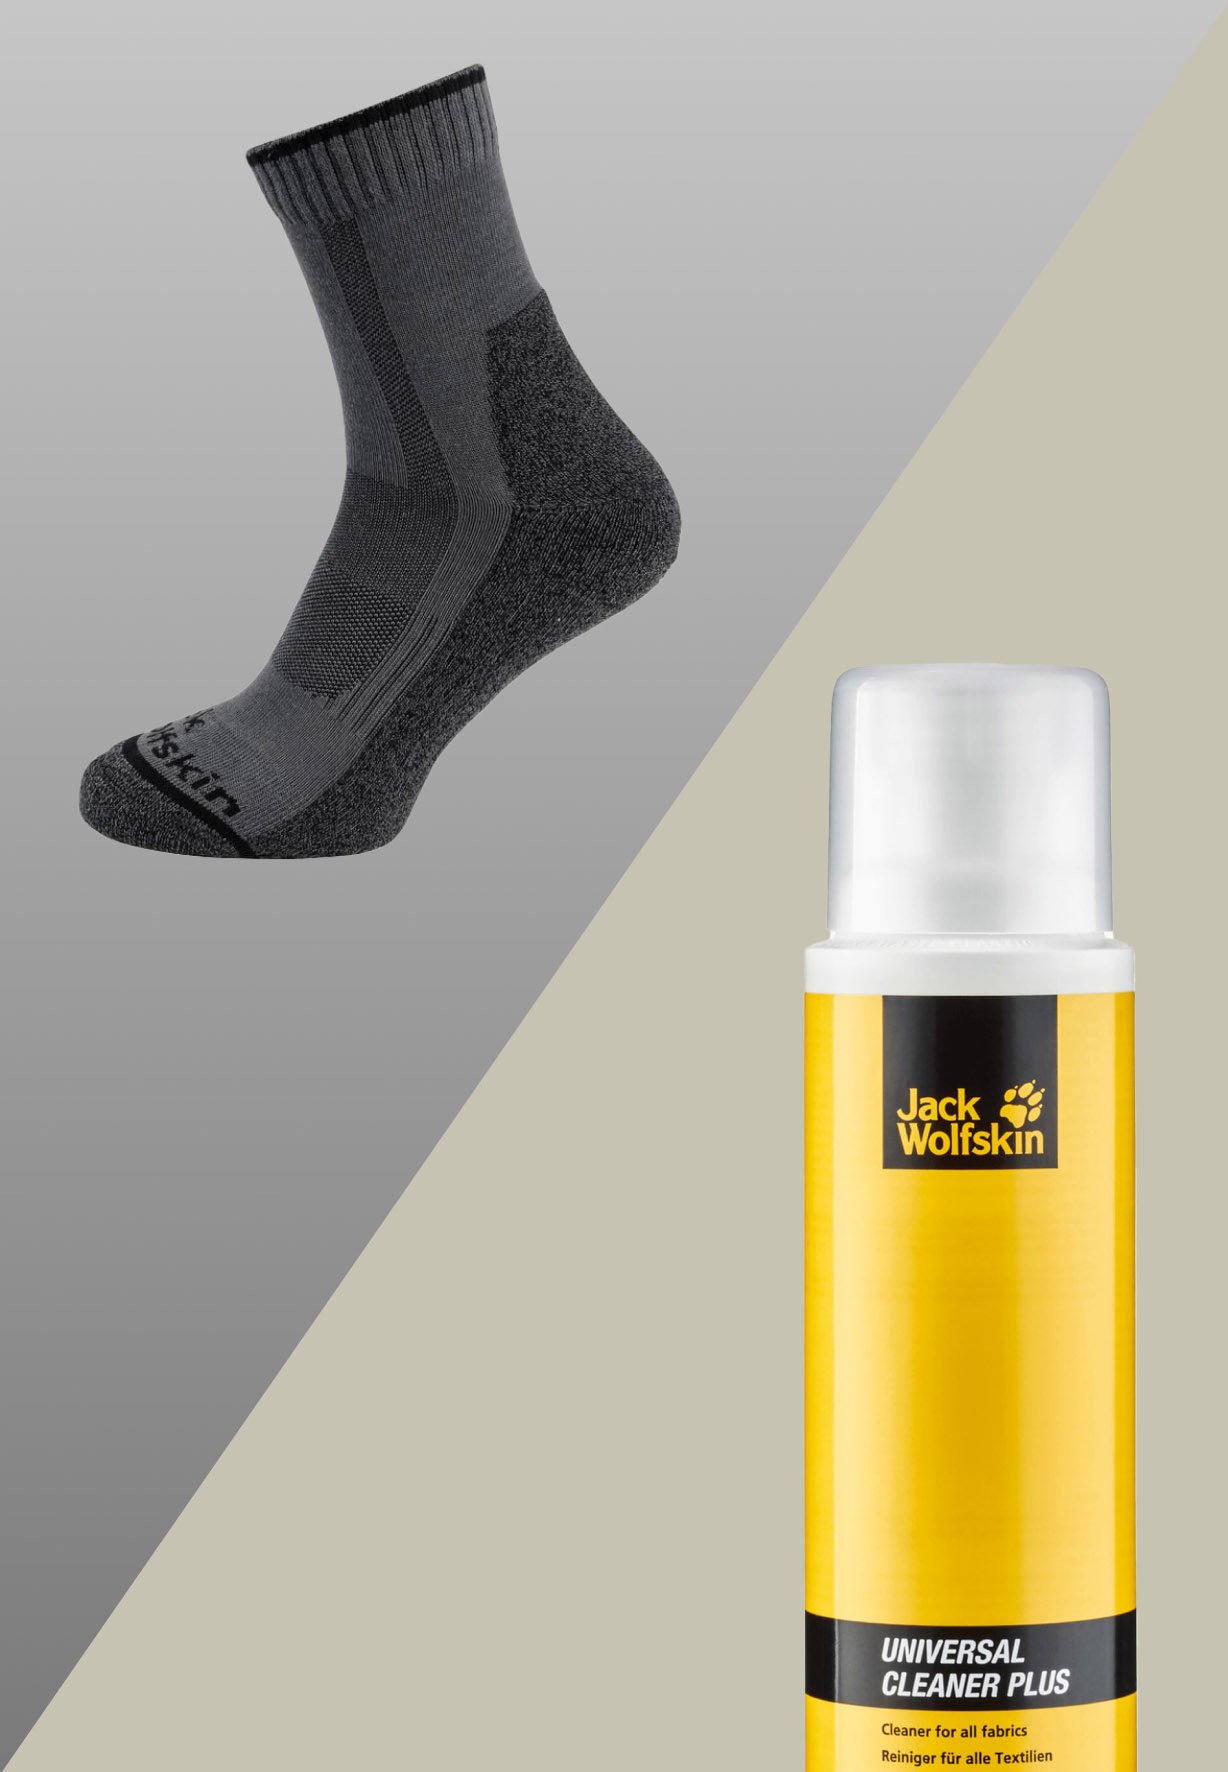 Socks & care products